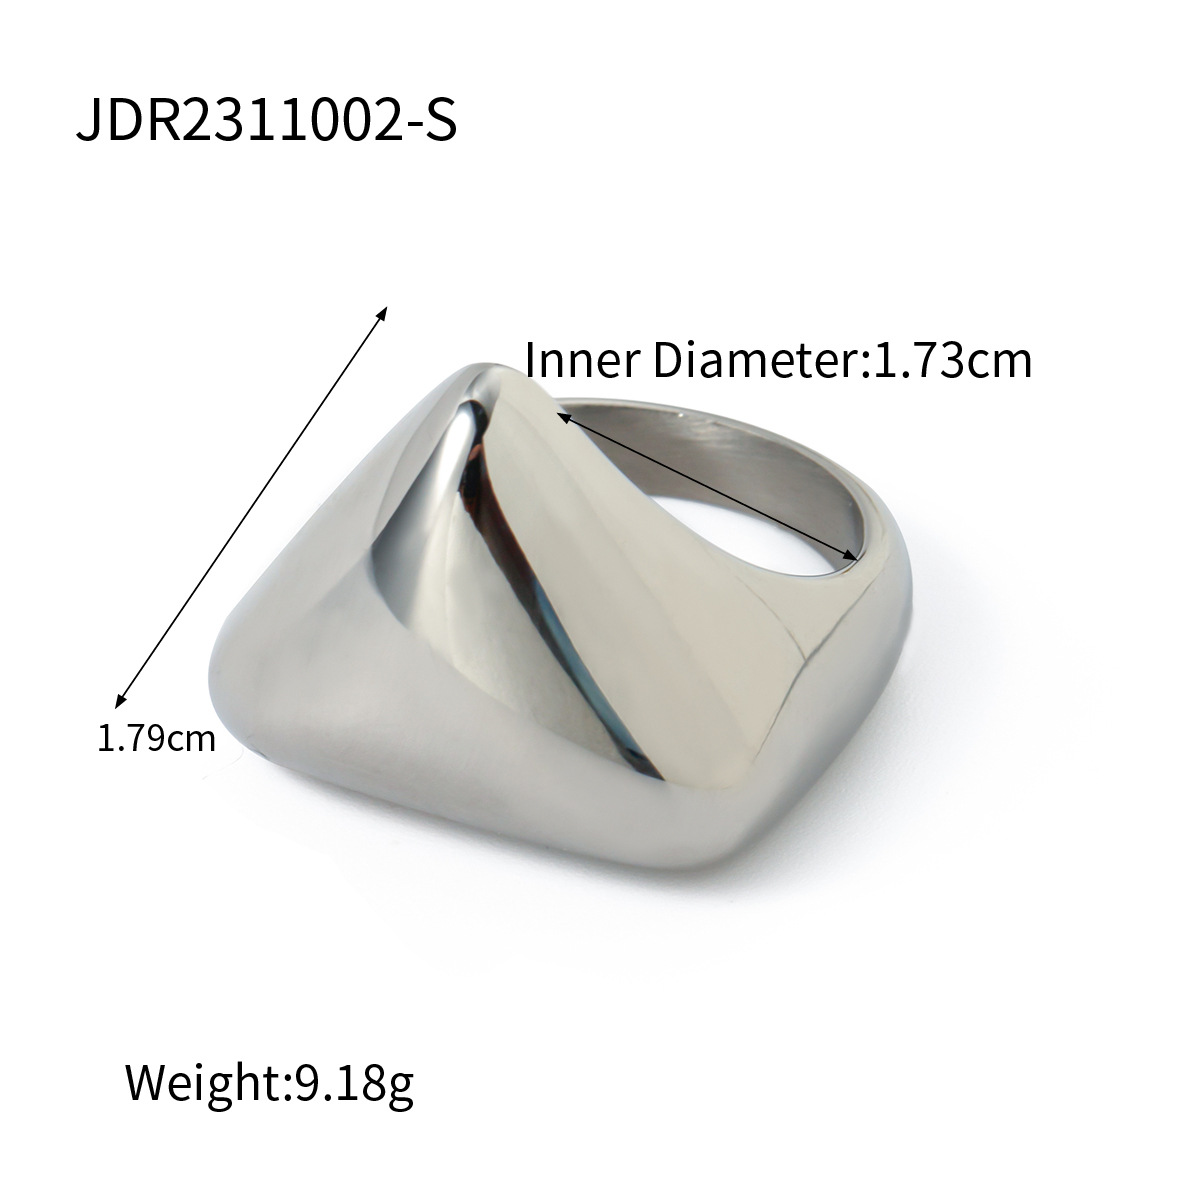 JDR2311002-S US Size #6